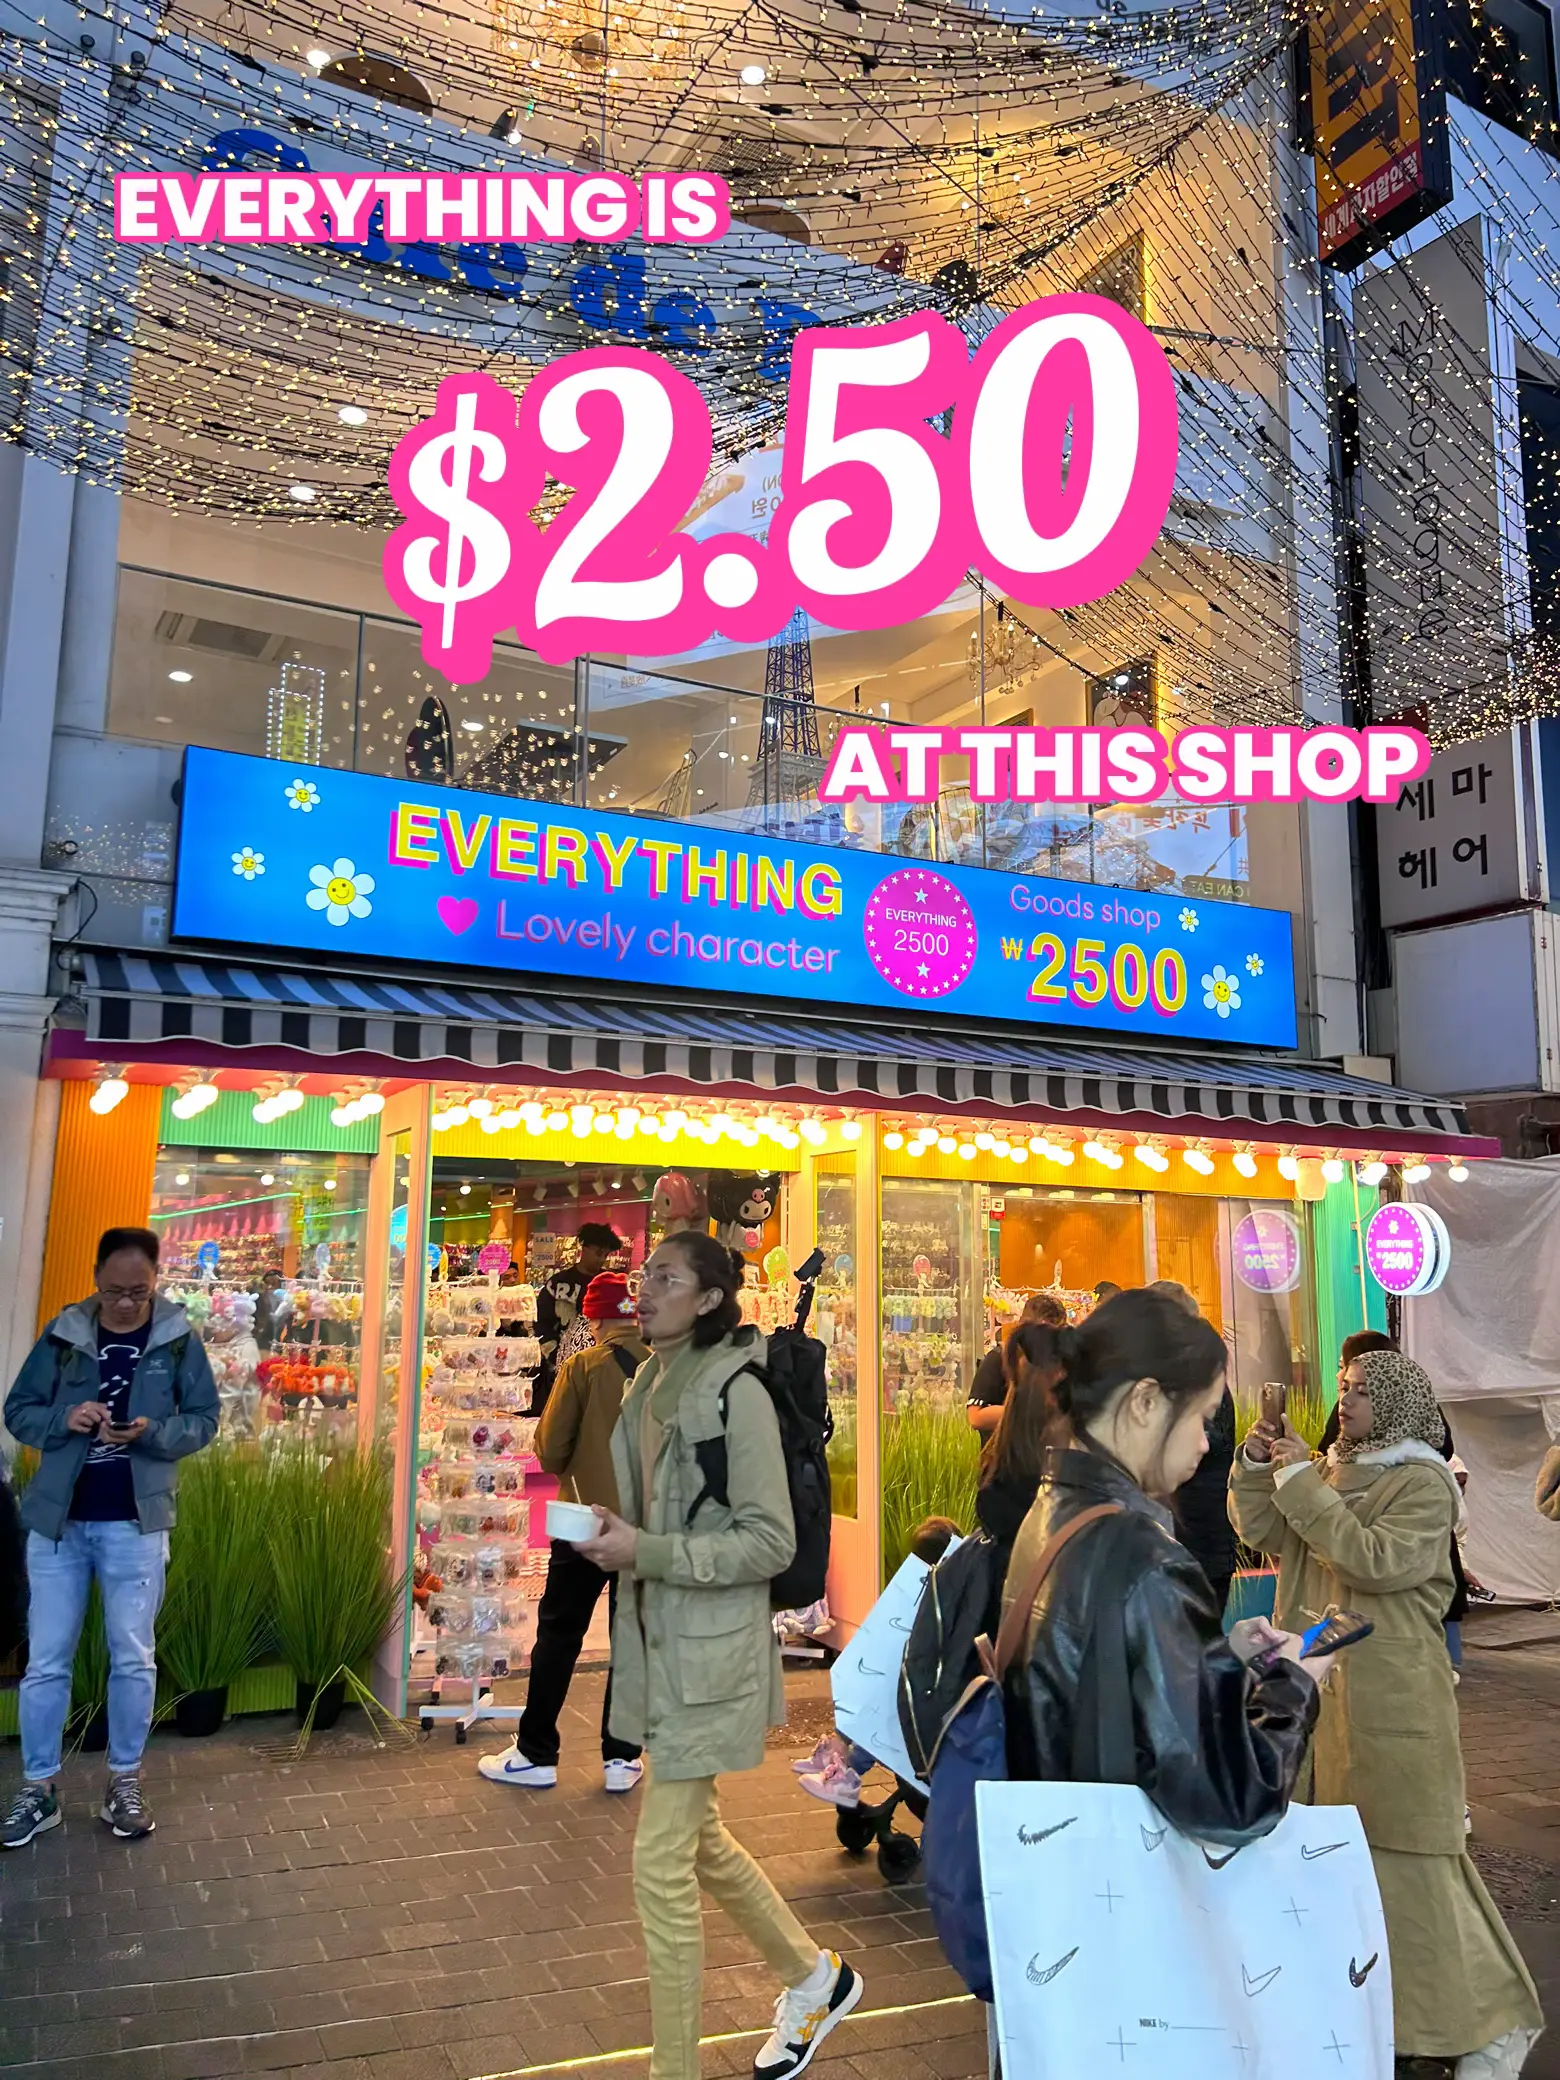 this shop in korea sells EVERYTHING at $2.50??? 🤯's images(0)